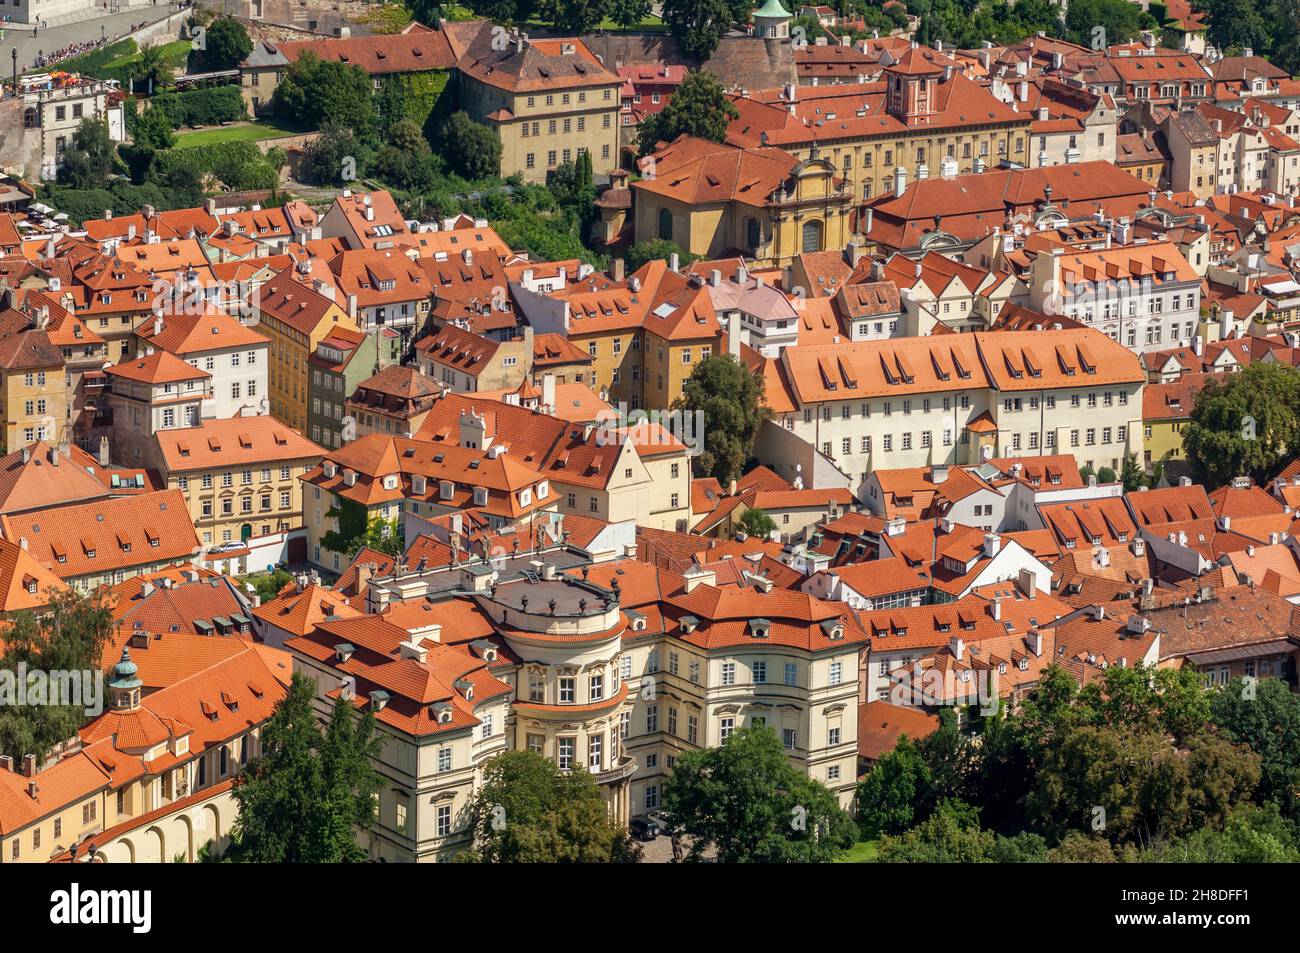 The German Embassy and the other colourful historic buildings of Malá Strana with their terra cotta tiled roofs and dormer windows Stock Photo